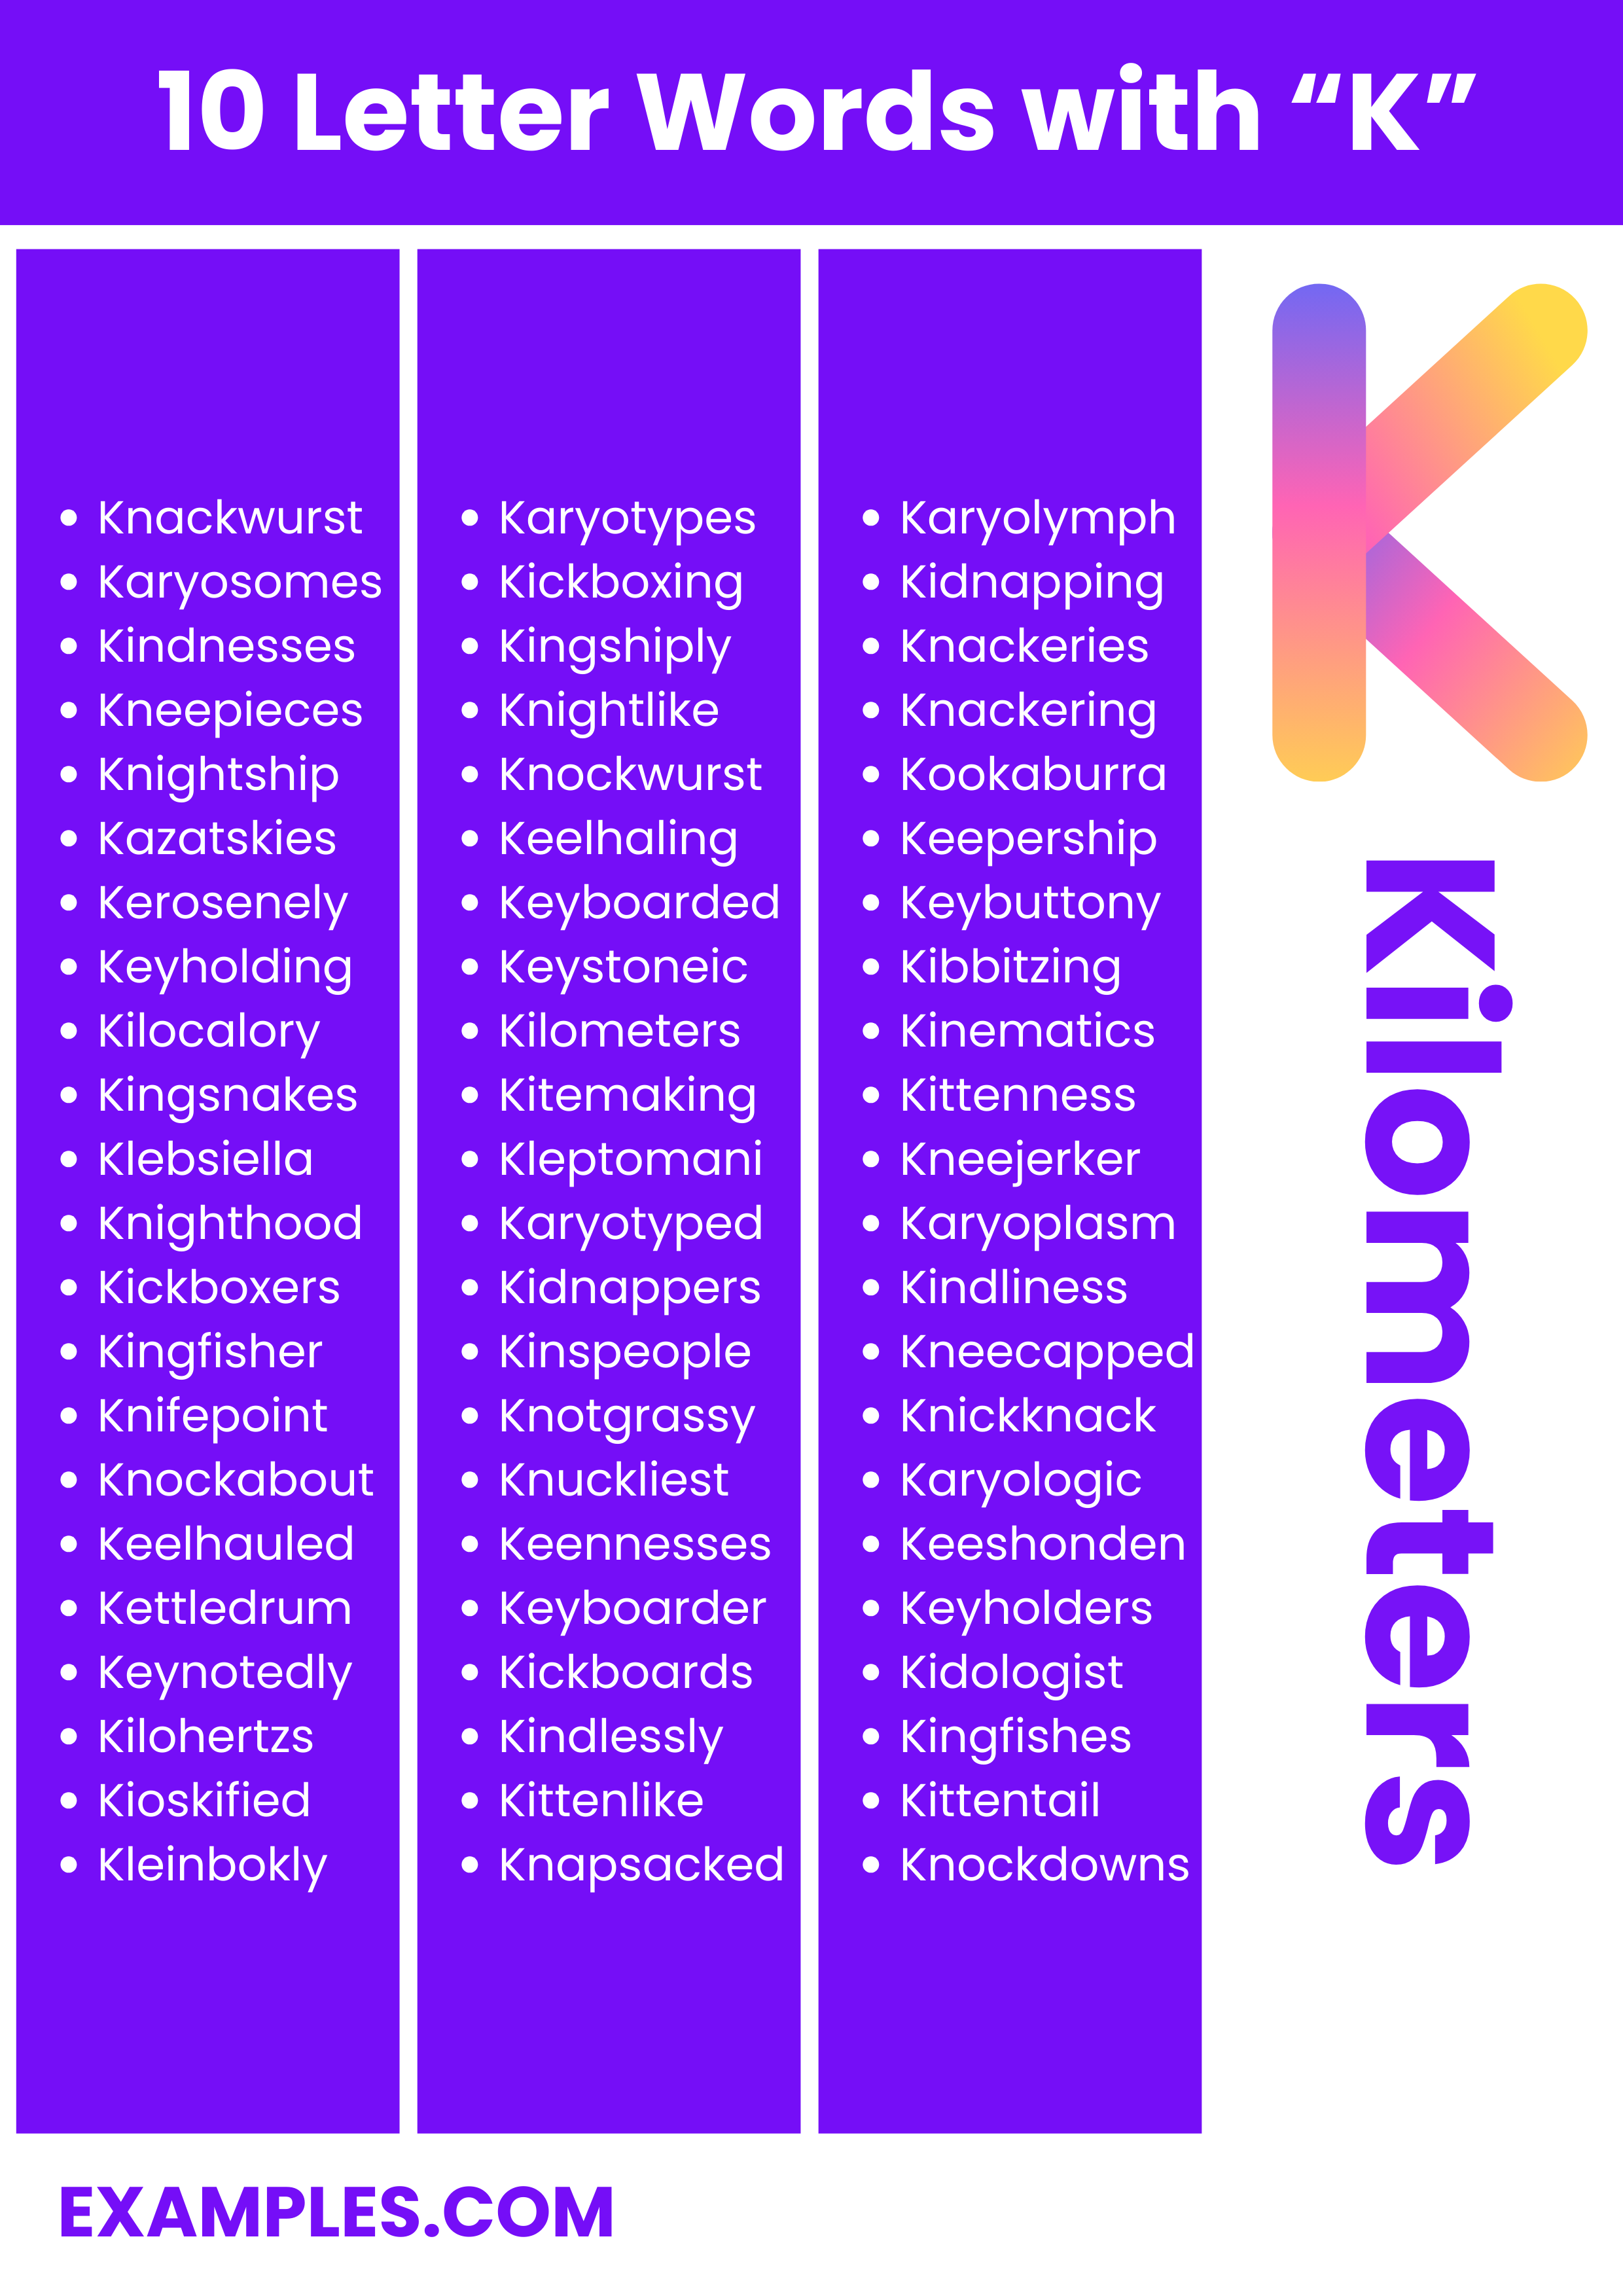 10 letter words with k